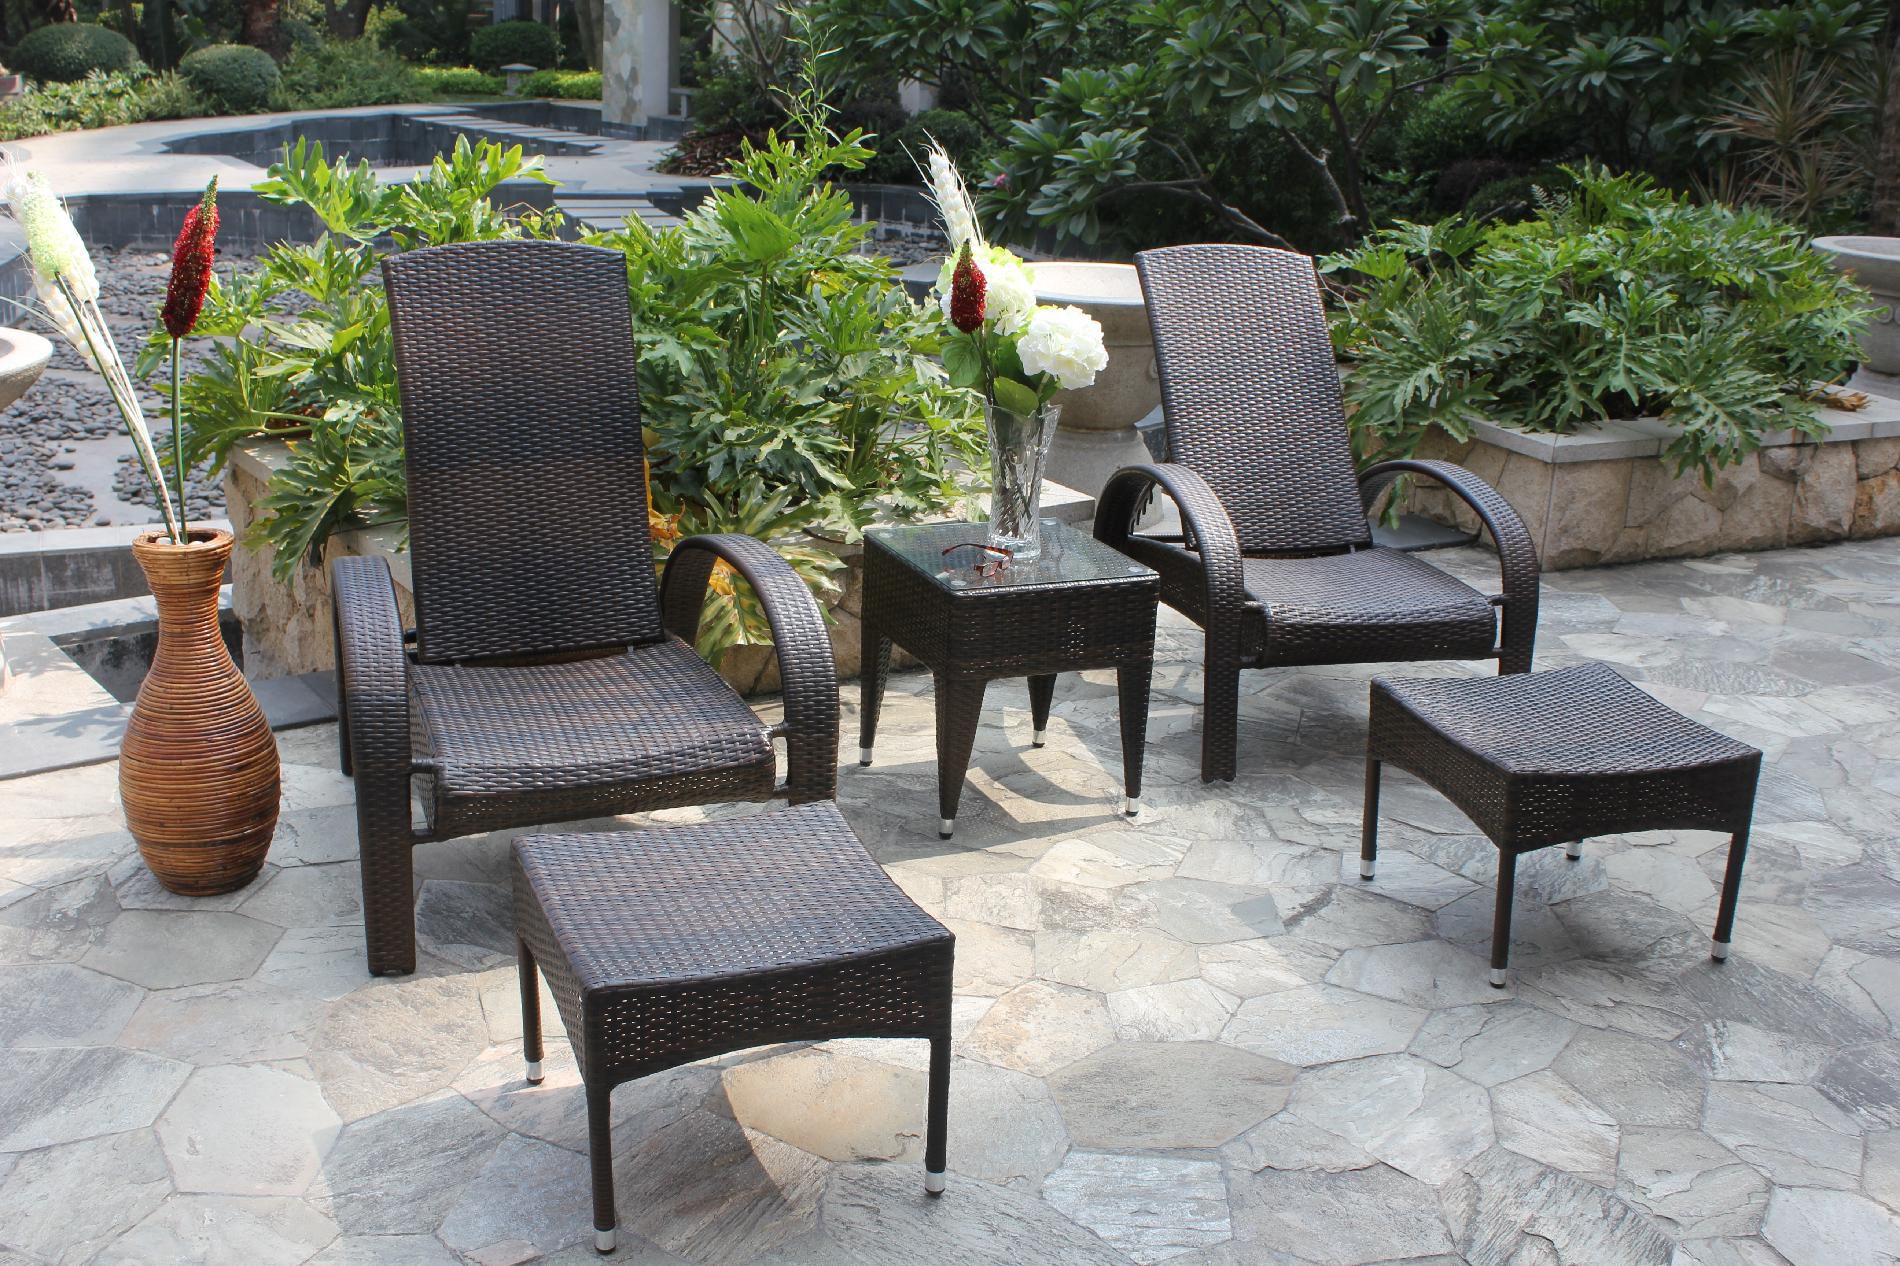 bellini home and gardens elliot 5 pc. chat group patio set - outdoor